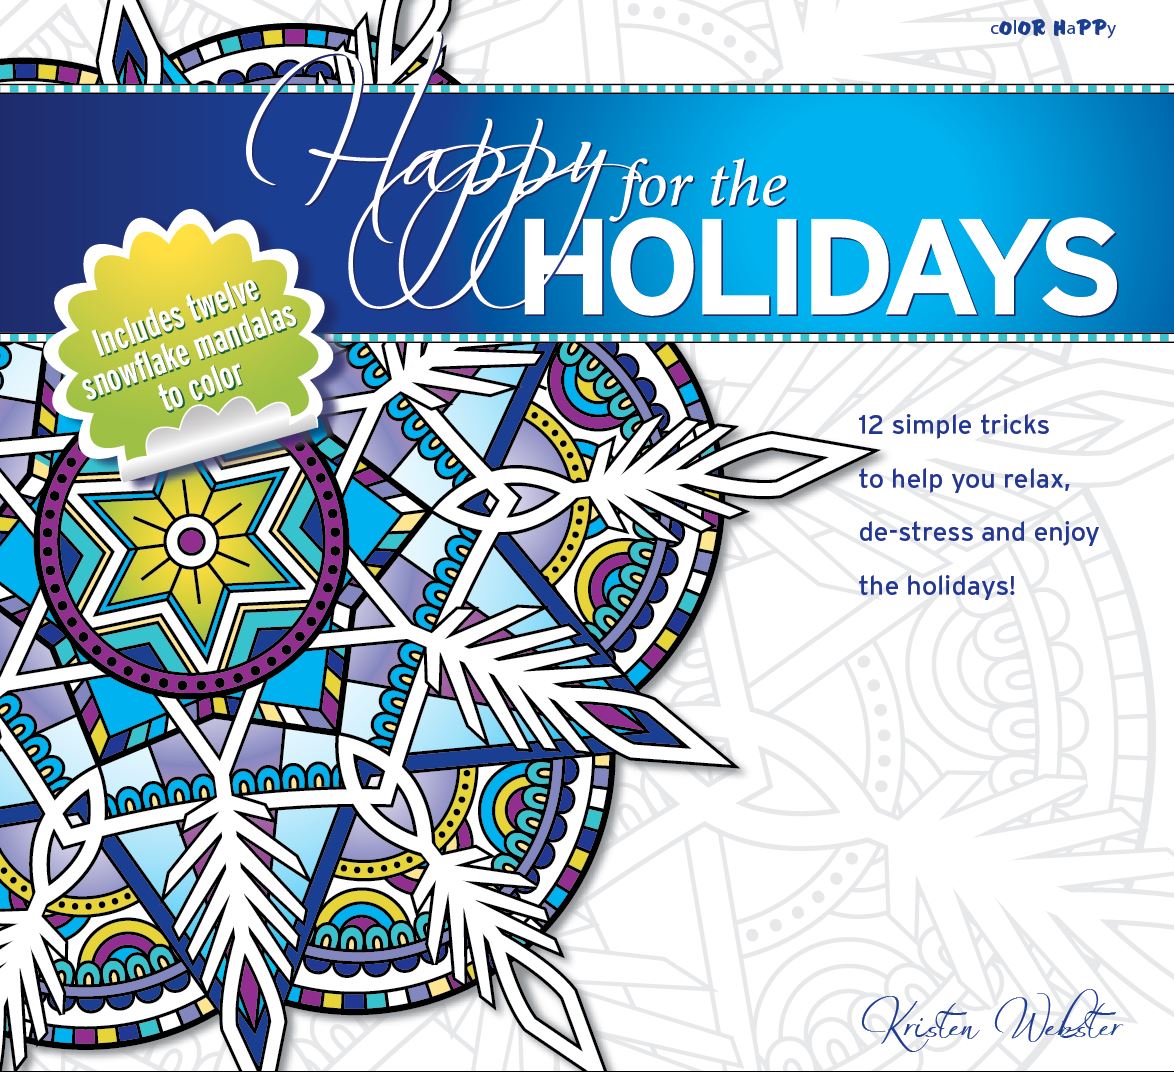 Happy for the Holidays: Coloring book with 12 simple tricks to help you relax, de-stress and enjoy the holidays!